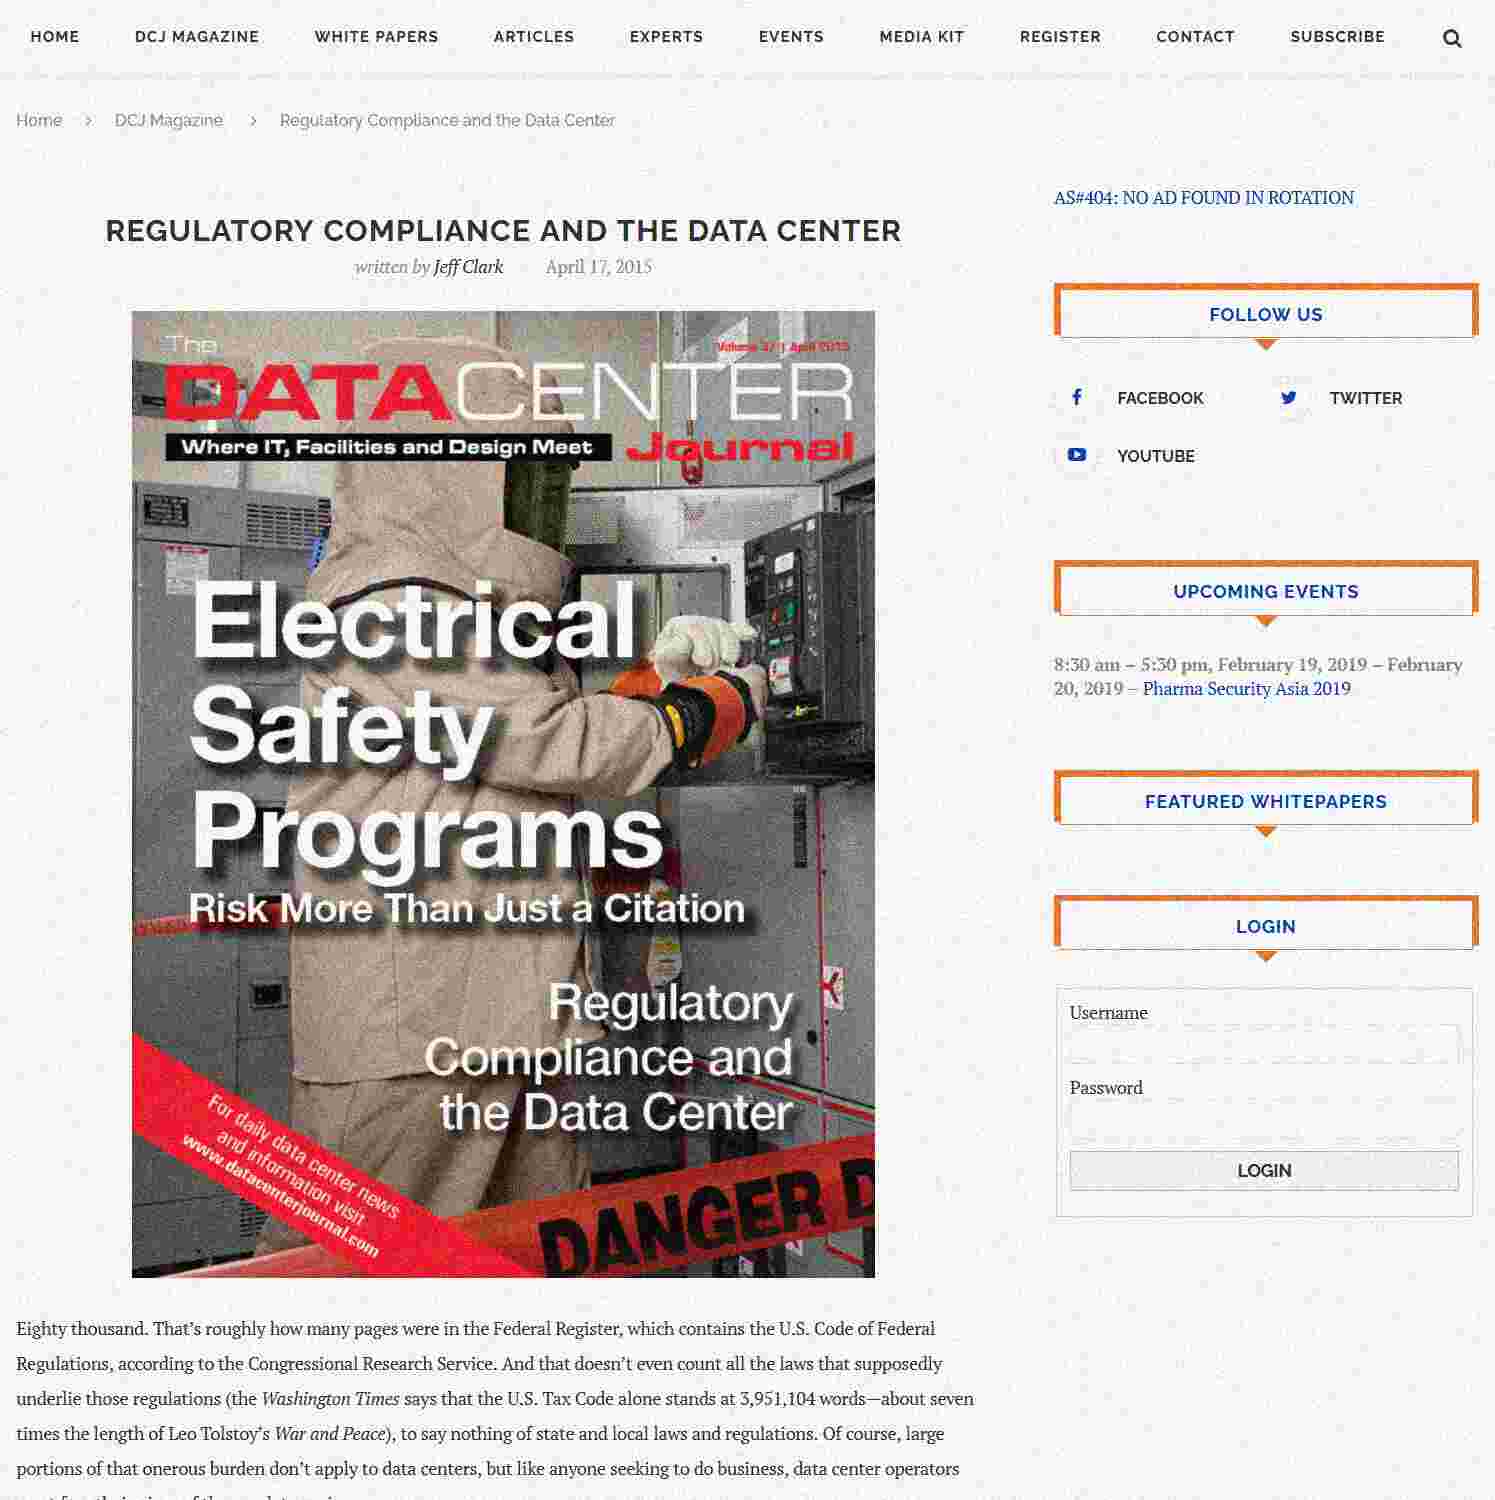 Illustration of Regulatory Compliance and the Data Center